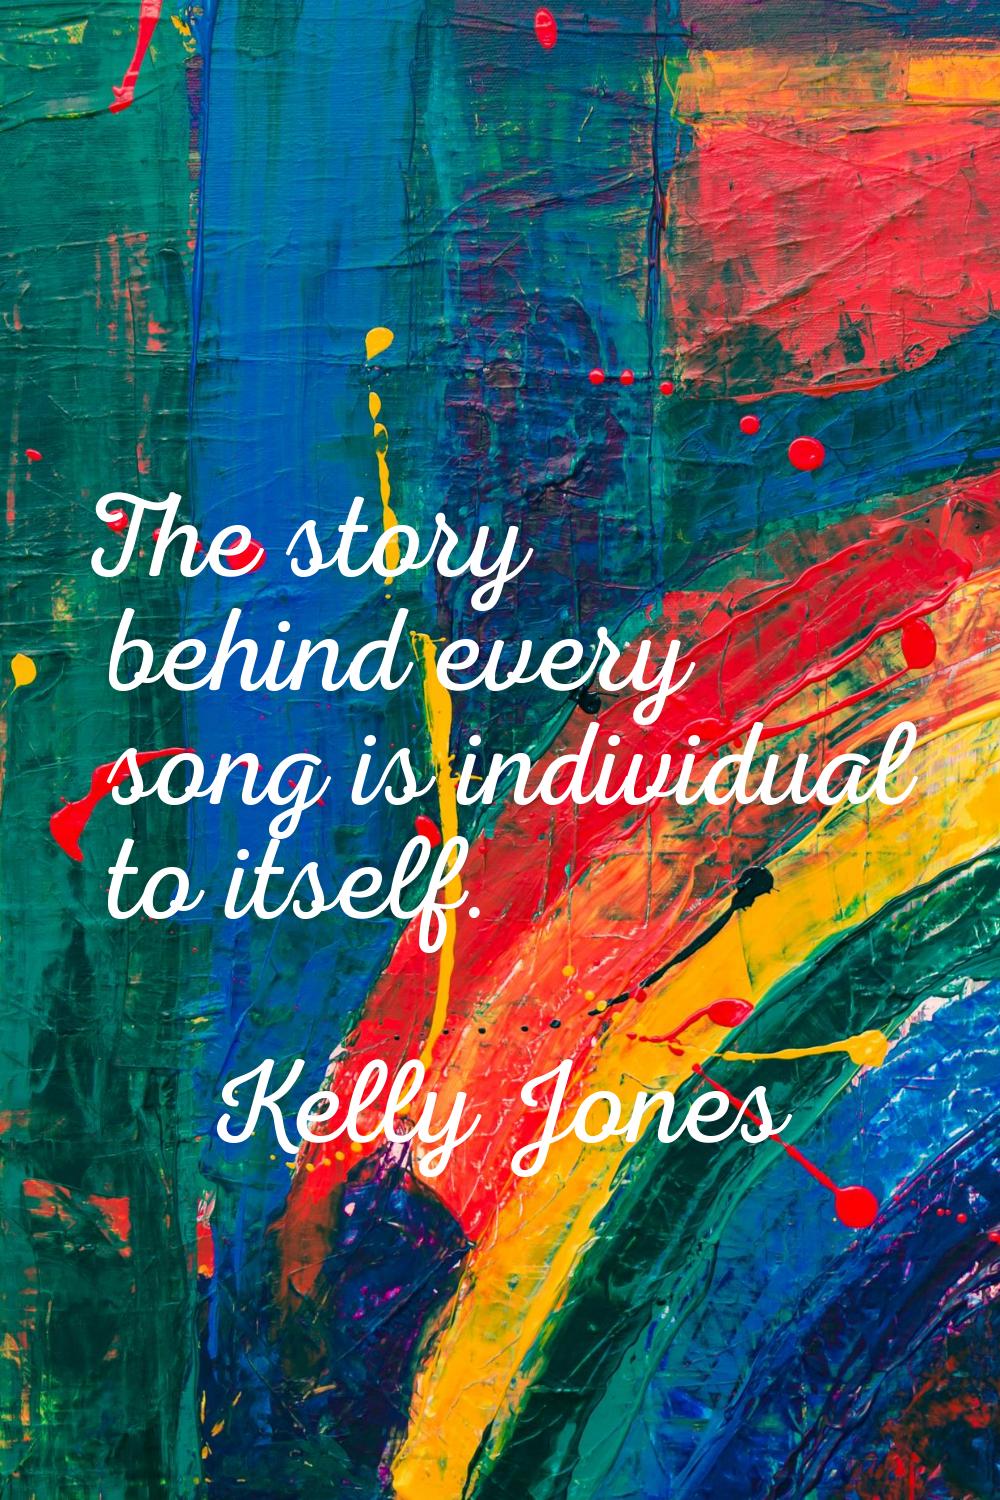 The story behind every song is individual to itself.